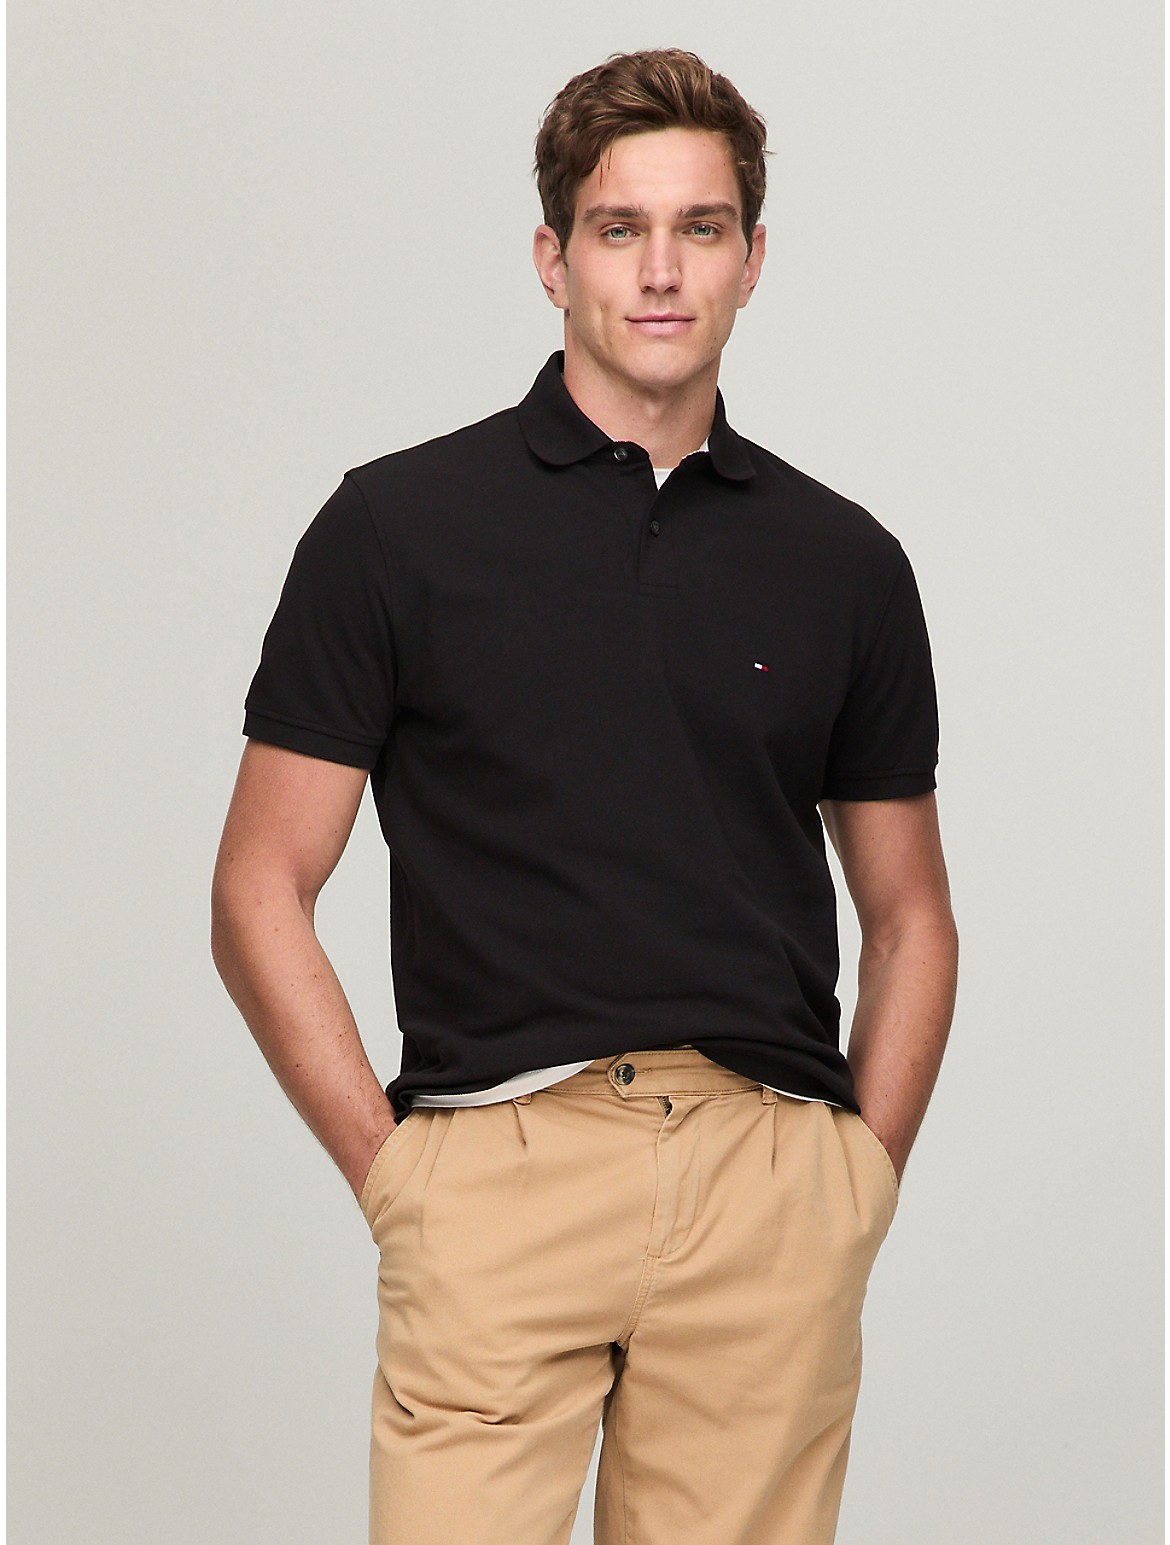 Tommy Hilfiger Men's Classic Fit 1985 Polo